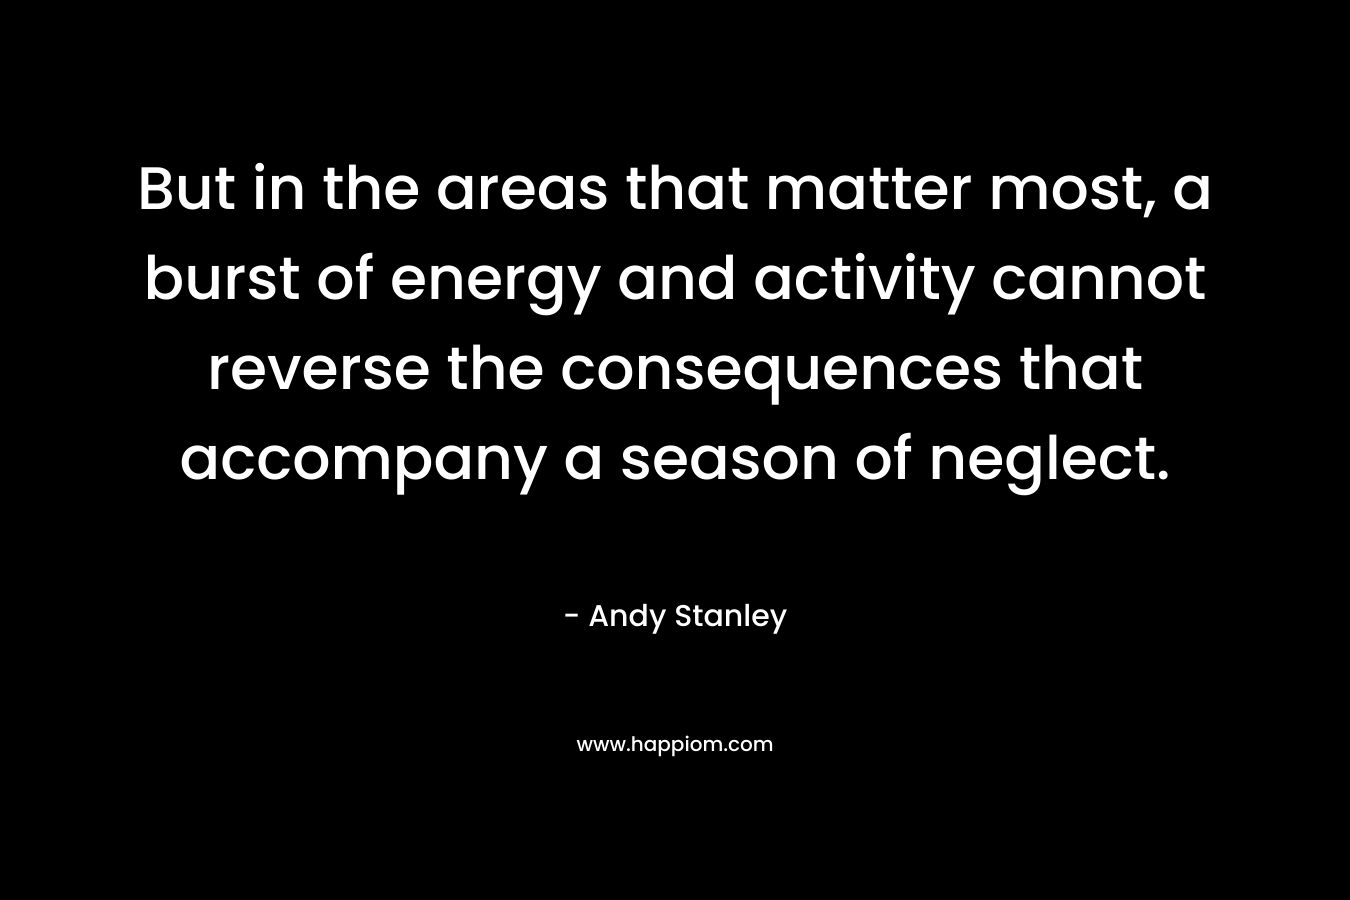 But in the areas that matter most, a burst of energy and activity cannot reverse the consequences that accompany a season of neglect. – Andy Stanley